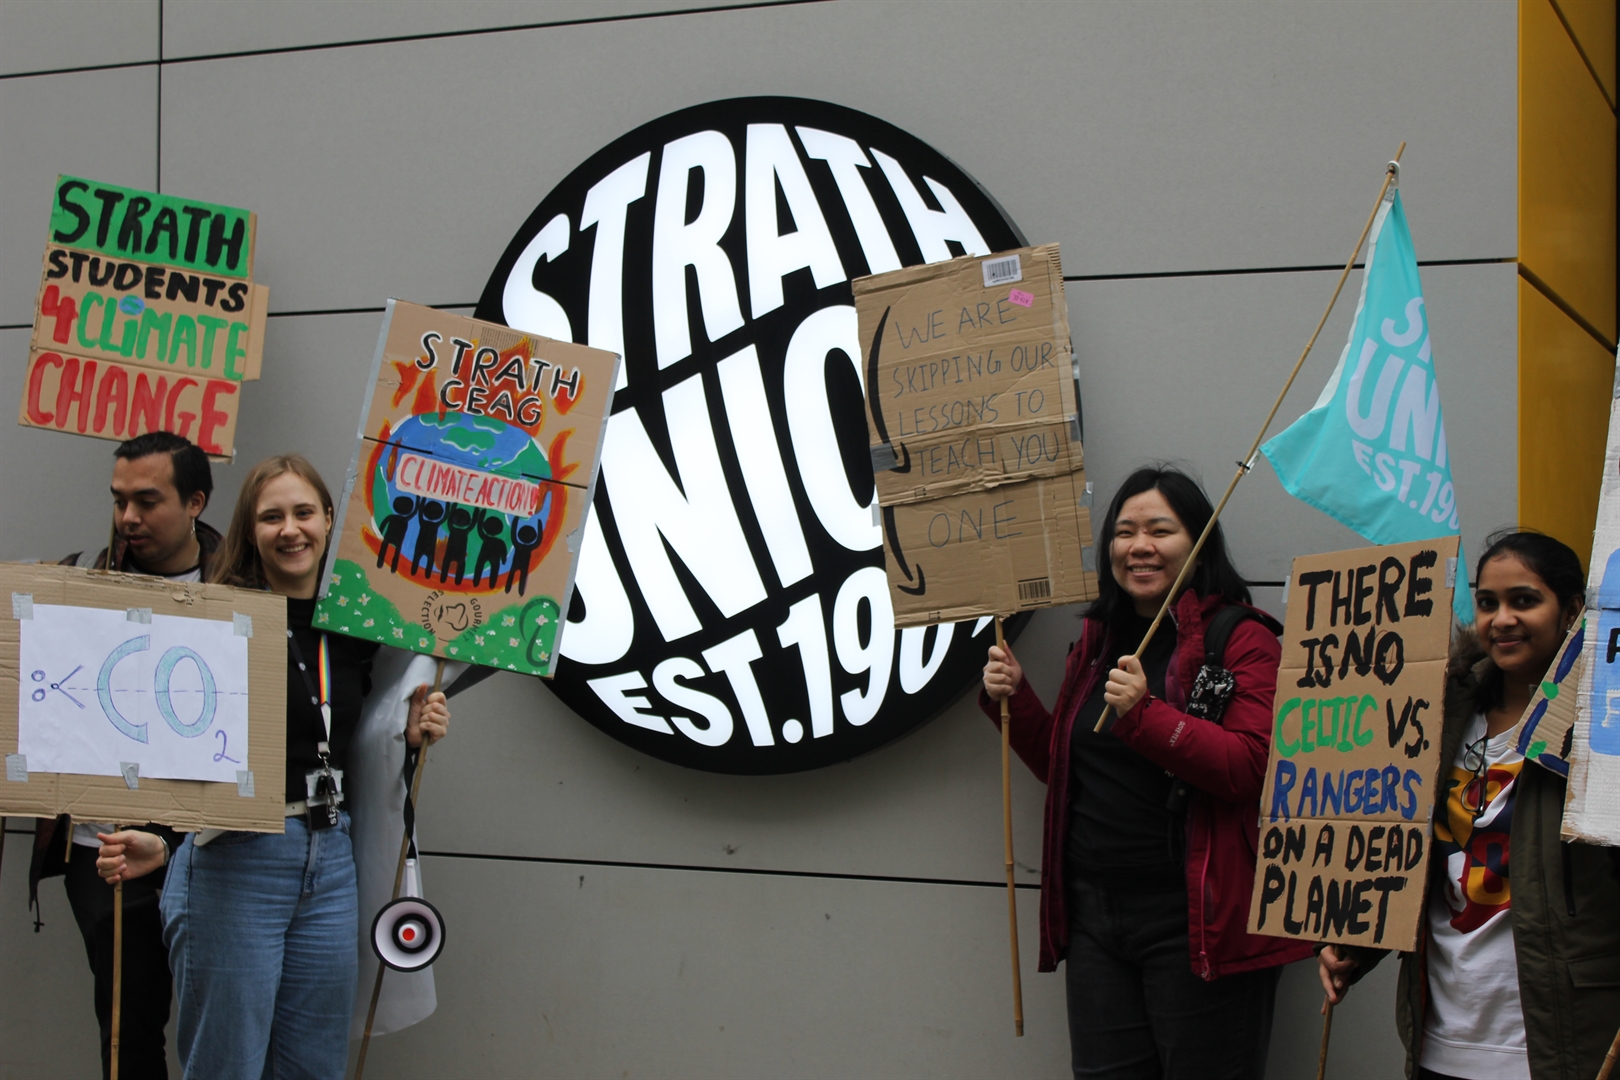 The current campaigns and projects that the Strathclyde Climate Emergency Action Group is running this academic year.